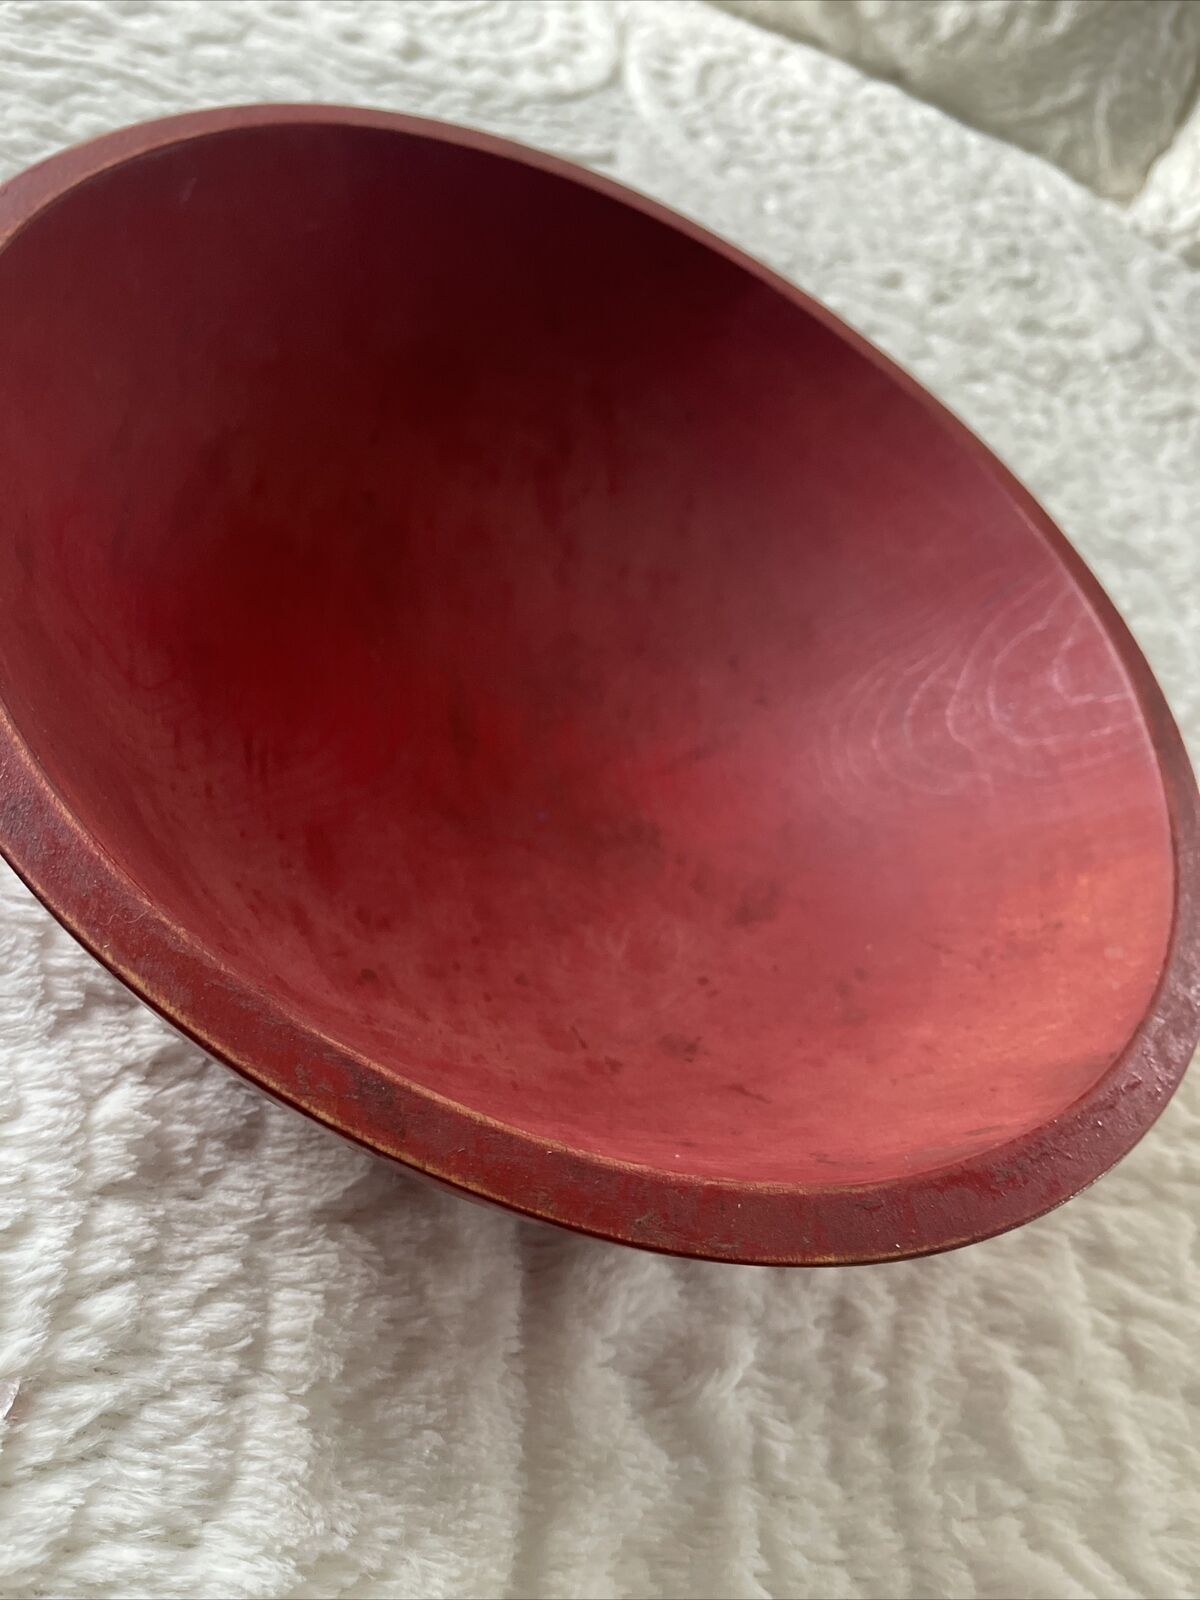 Vintage Red Wood Bowl Off Round 14.5” and 4.5” Handmade? Farmhouse Primitive